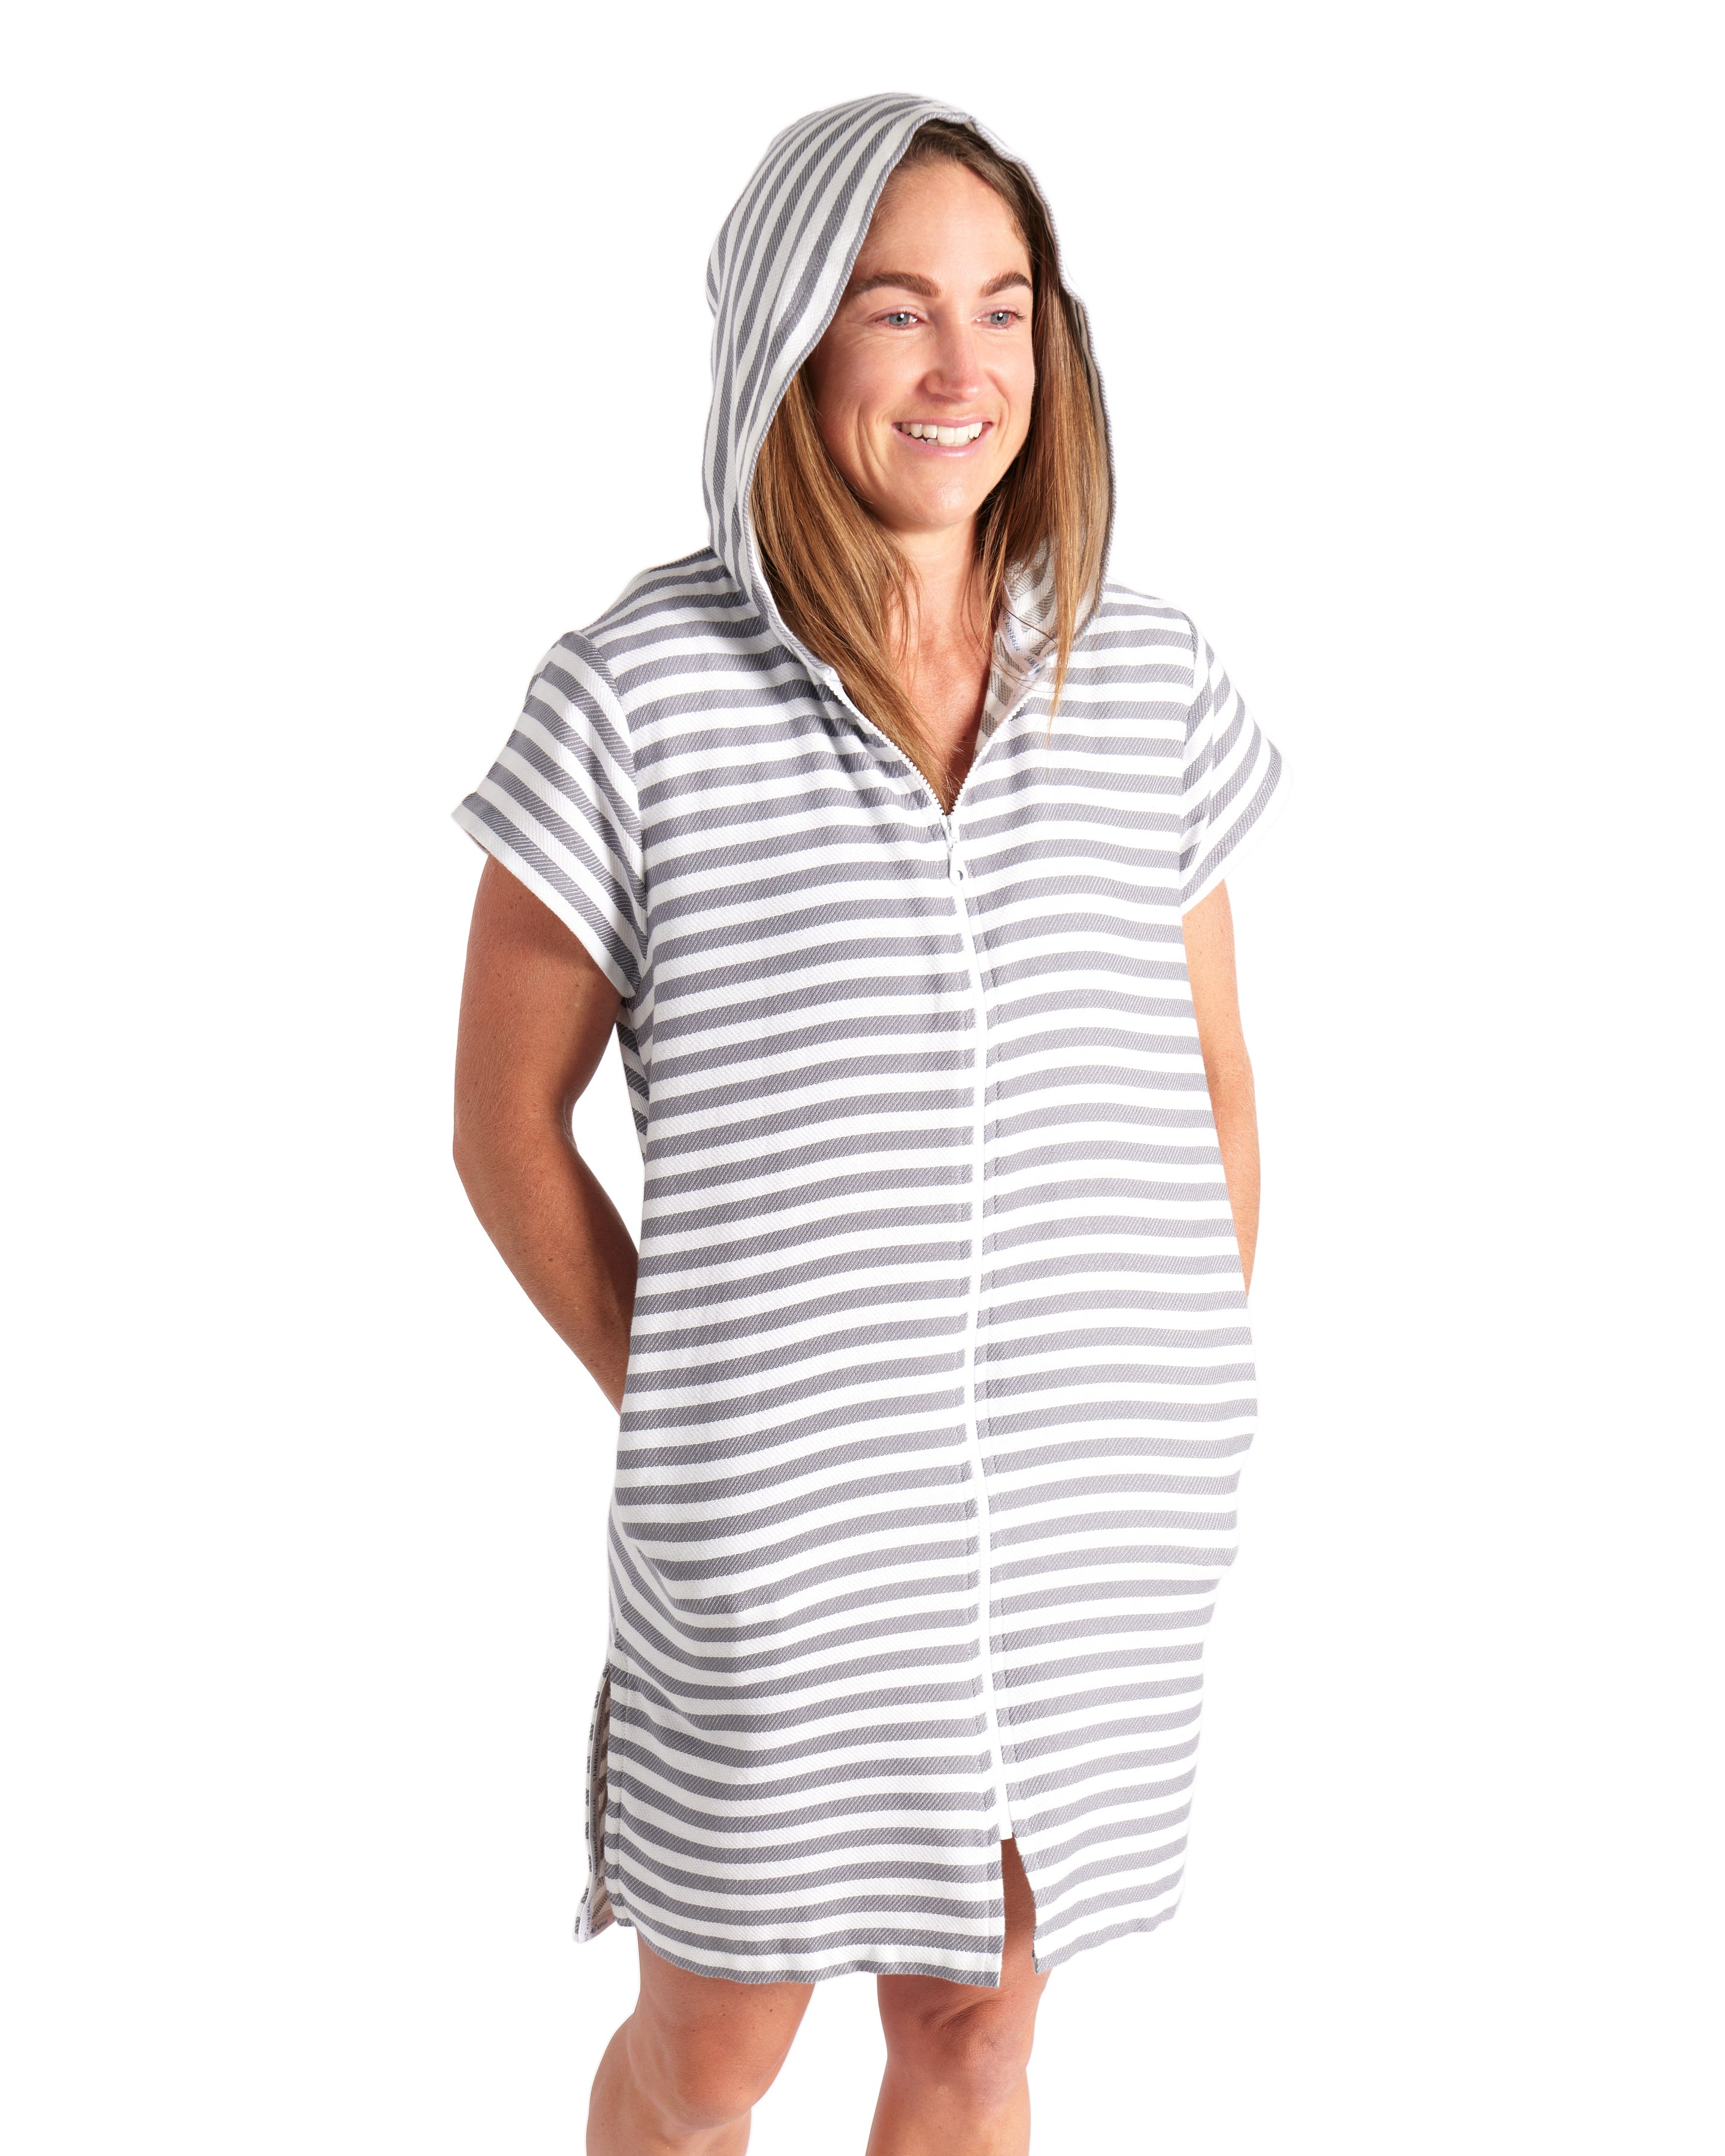 CHIOS Adult Cap Sleeve Hooded Towel: Charcoal/Natural